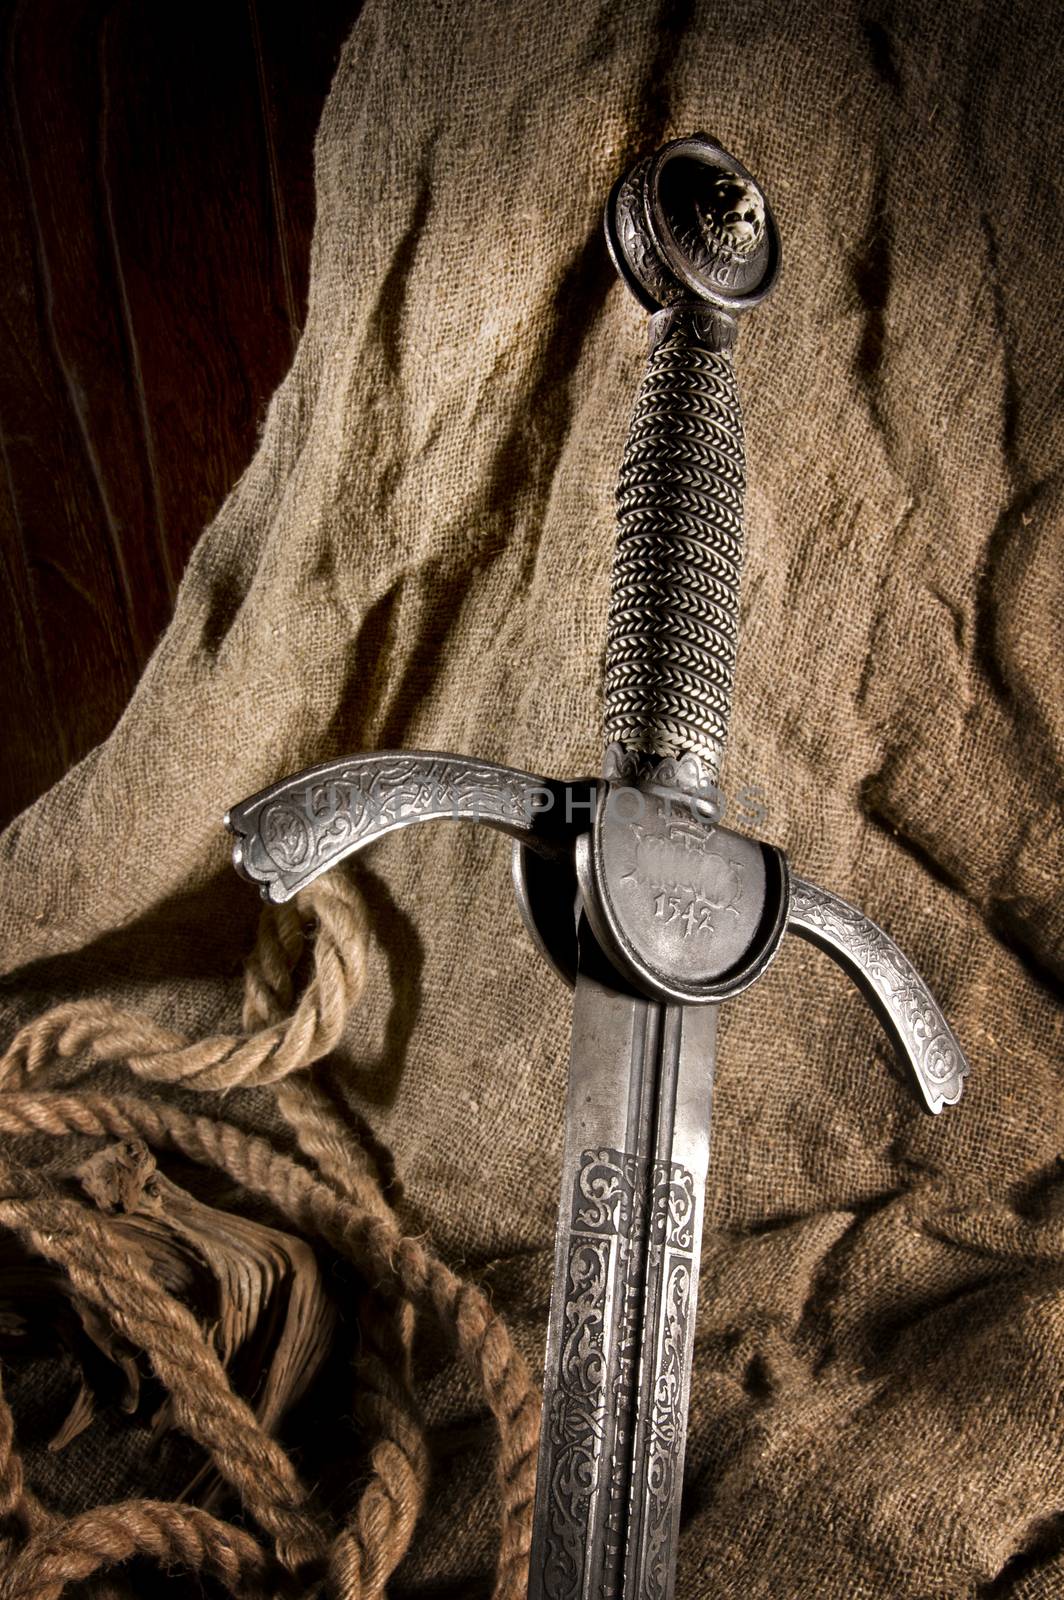 smart sword of the knight of the middle ages